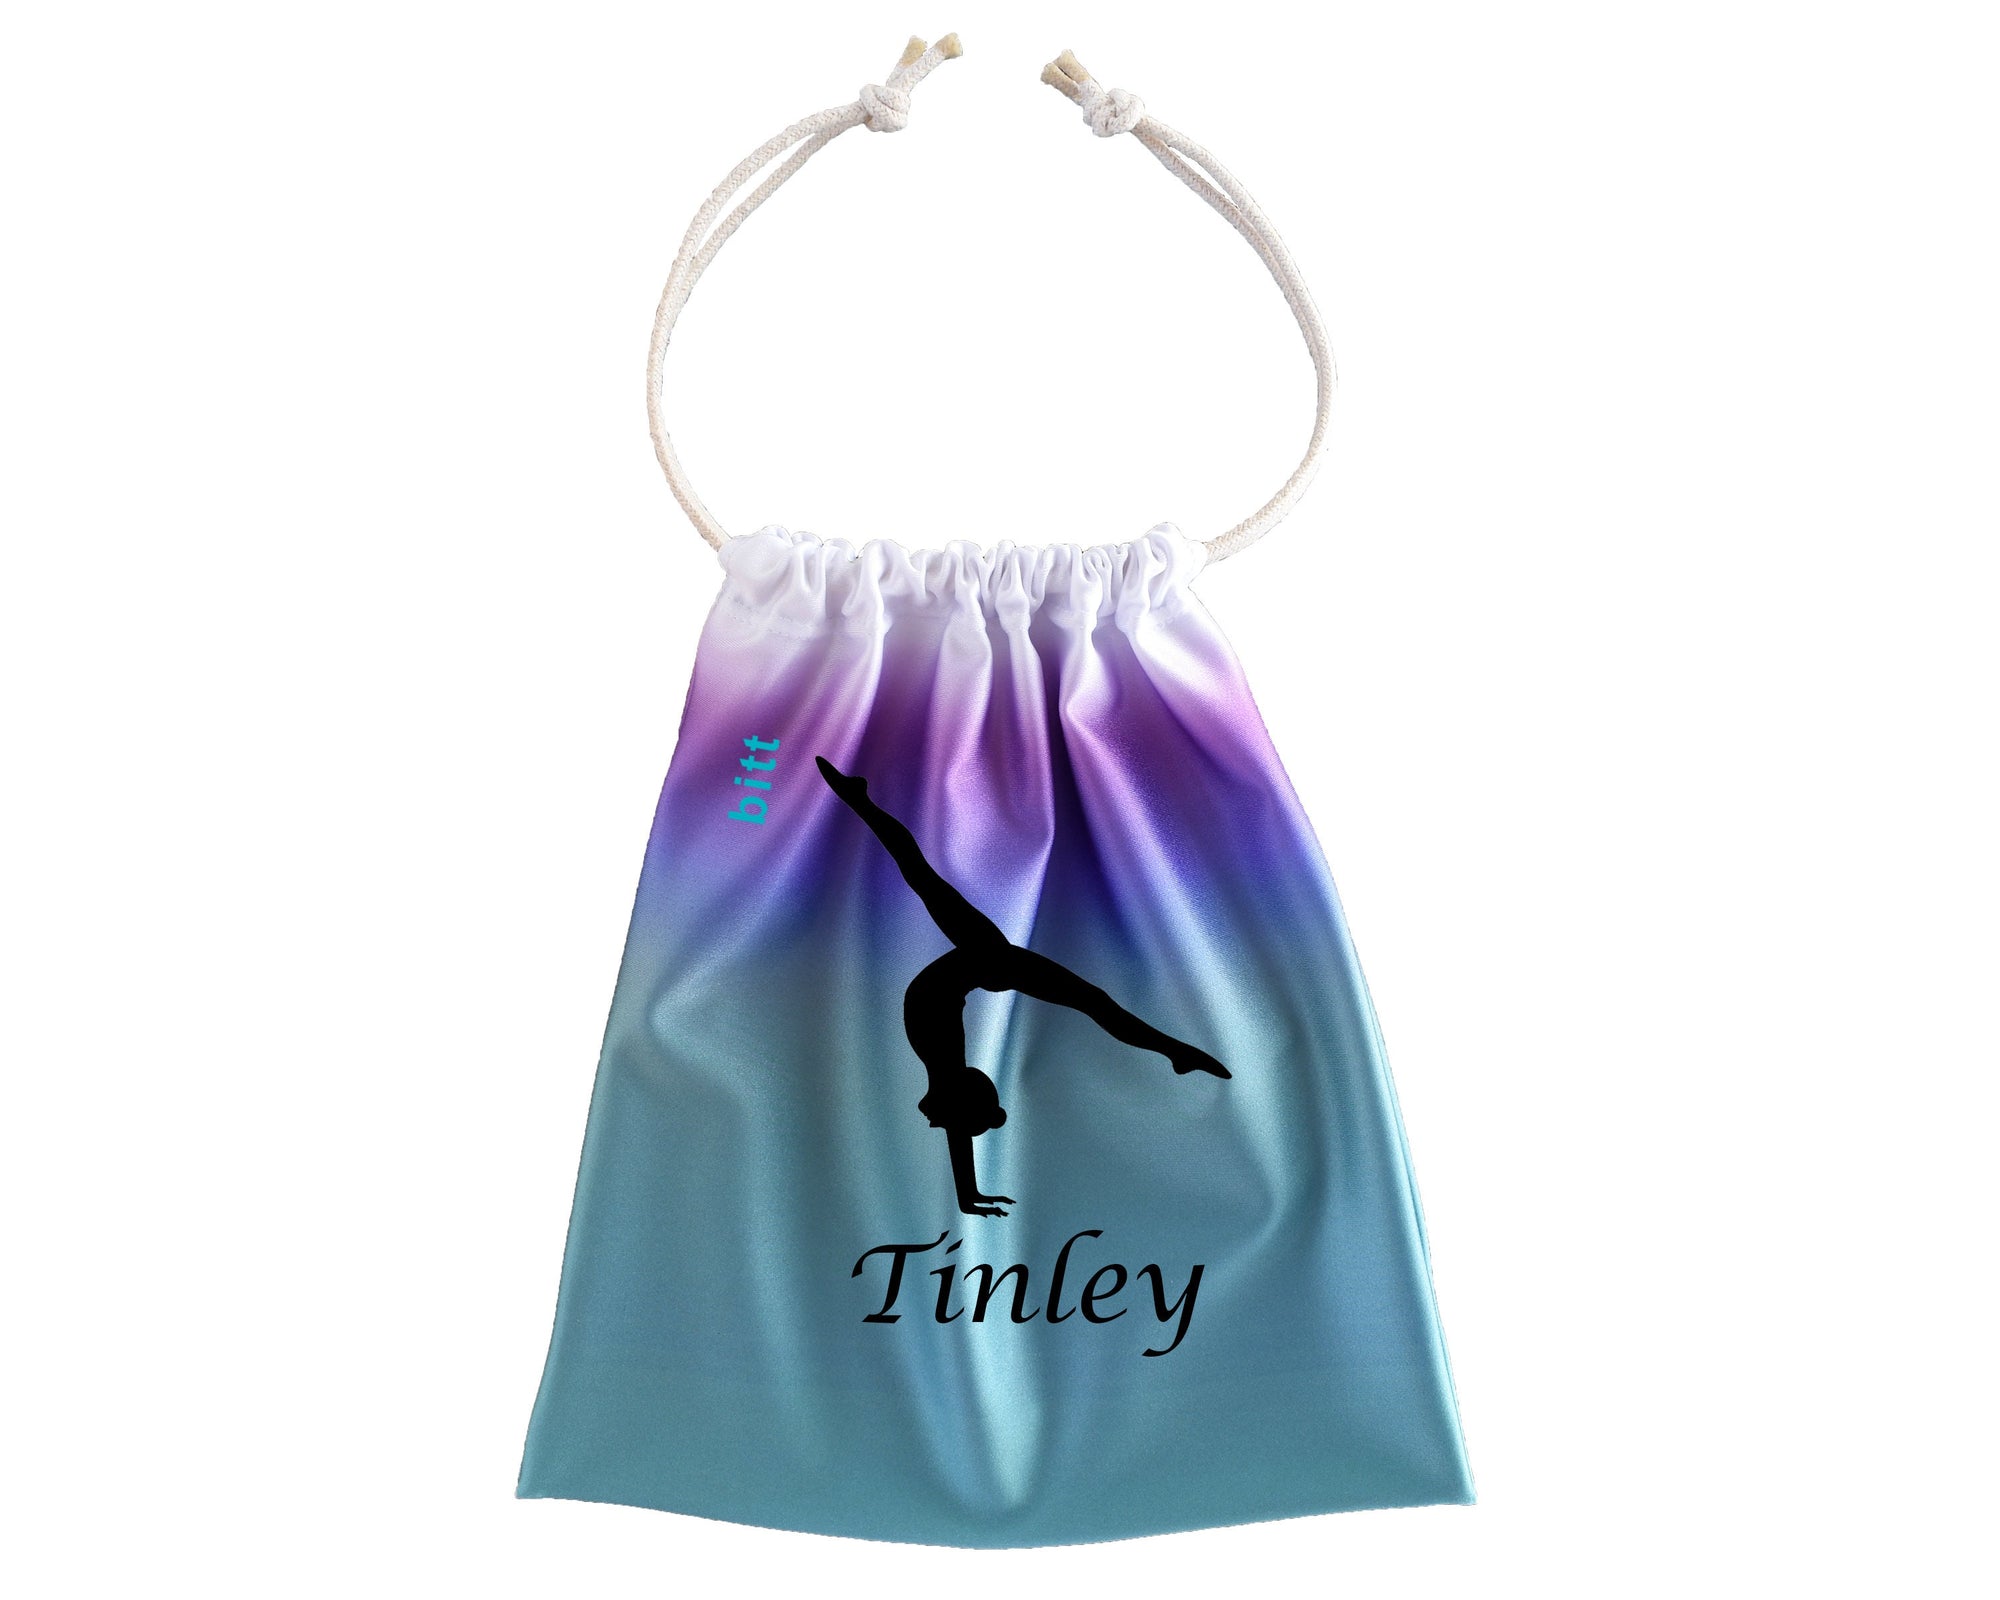 Personalized Gymnastics Grip Bag in Teal Purple and White Ombre with Split Handstand